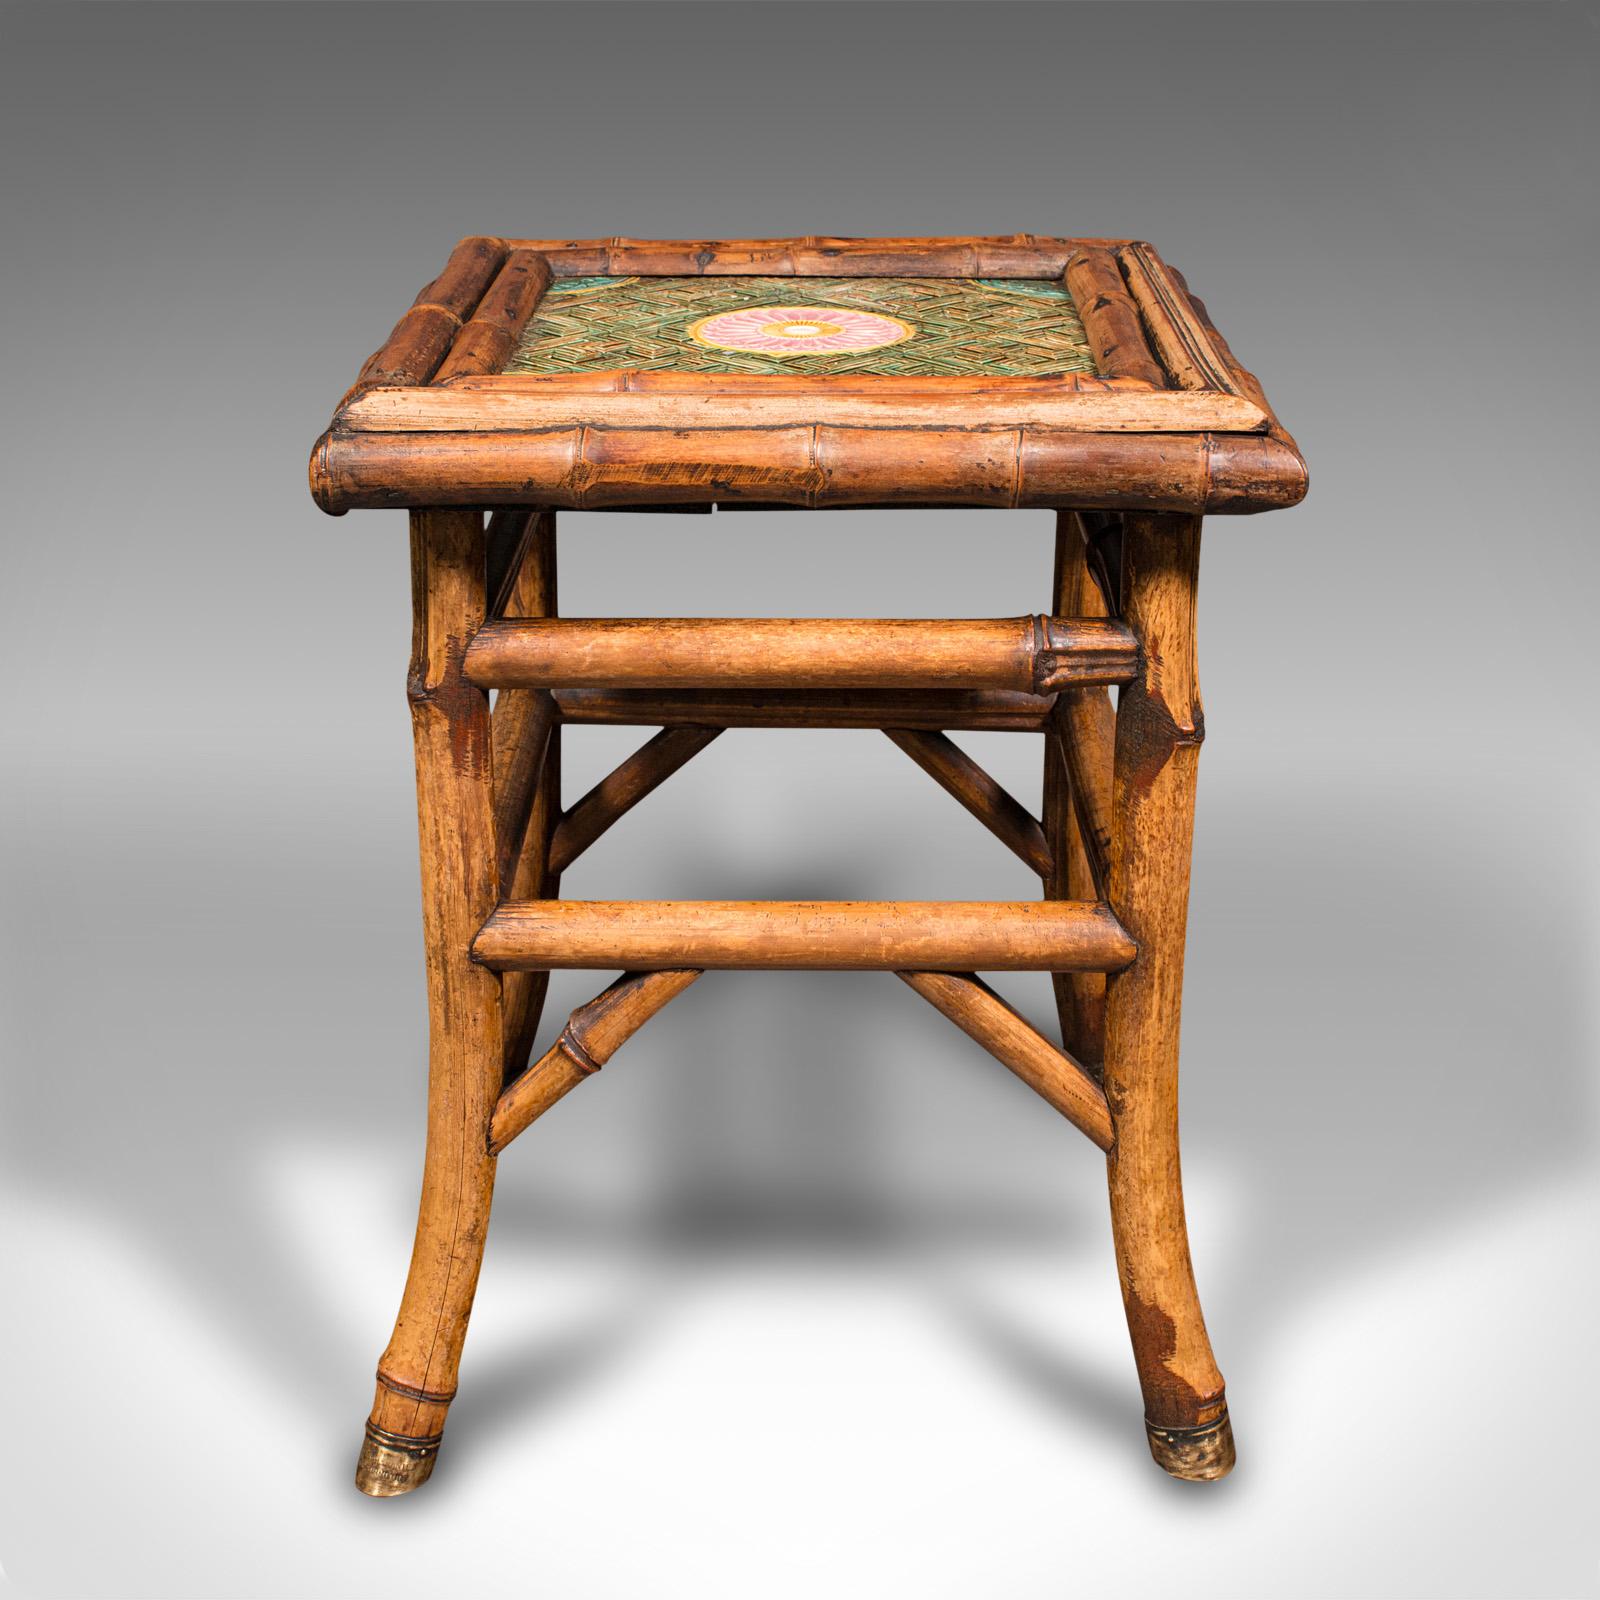 This is a small antique lamp table. An English, bamboo and ceramic tile side table by WF Needham, dating to the late Victorian period, circa 1900.

Delightfully petite, late Victorian table with charming tiled top
Displays a desirable aged patina